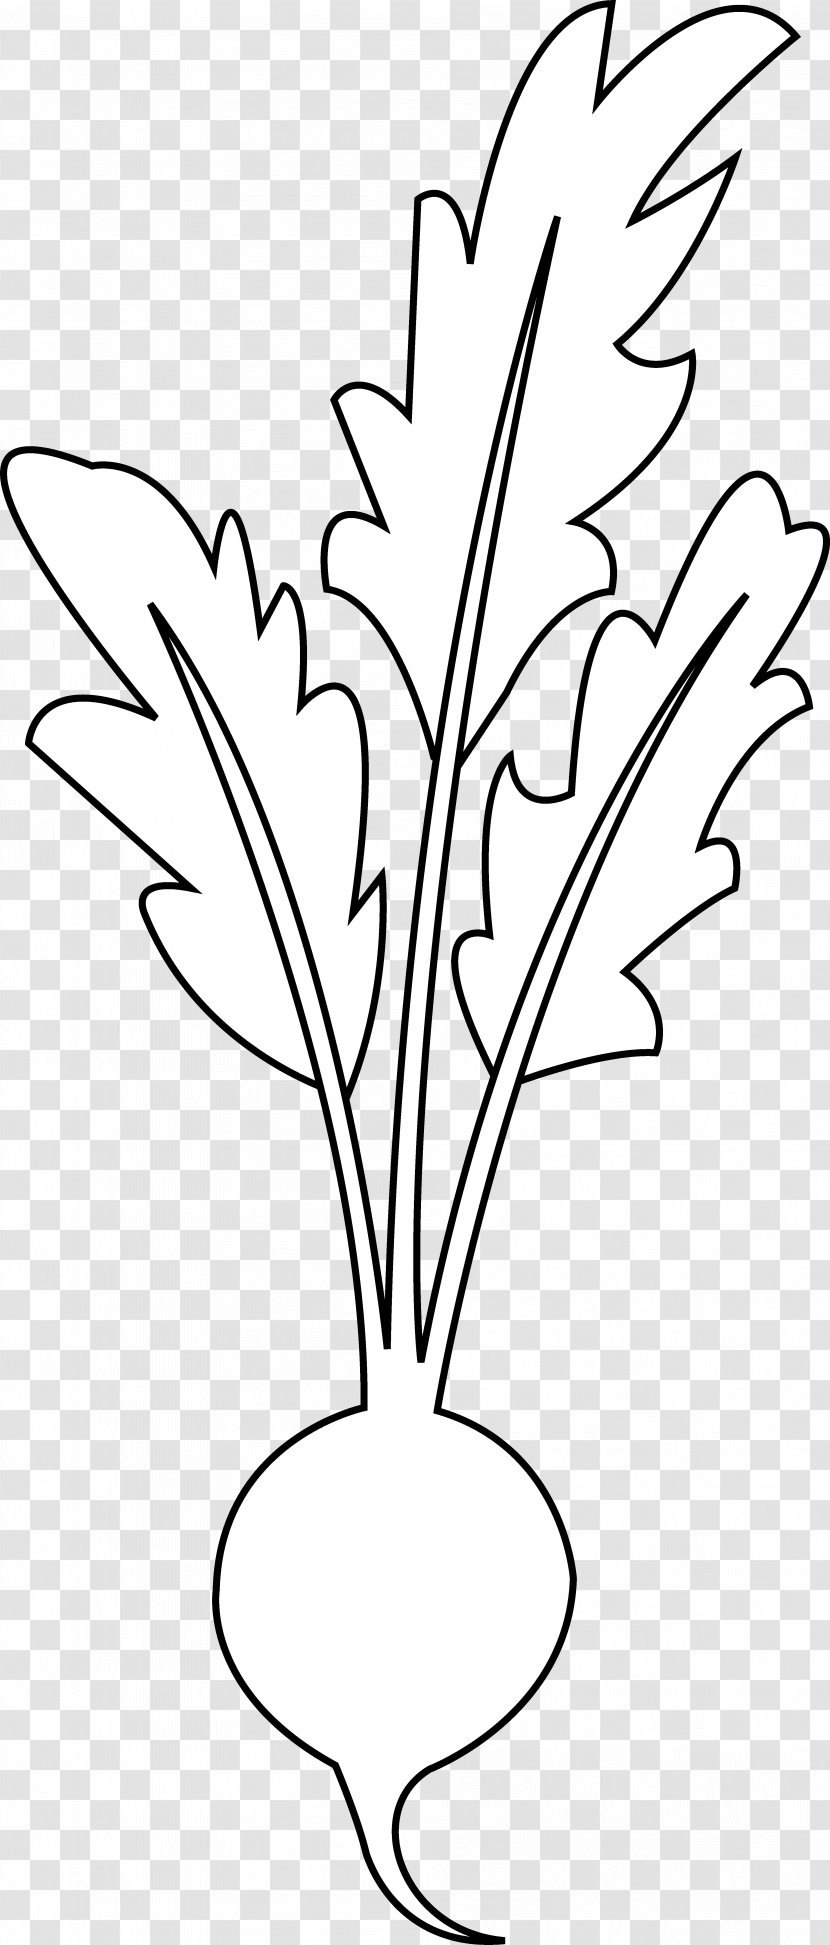 Beetroot Line Art Vegetable Black And White Clip - Monochrome - Beet Transparent PNG